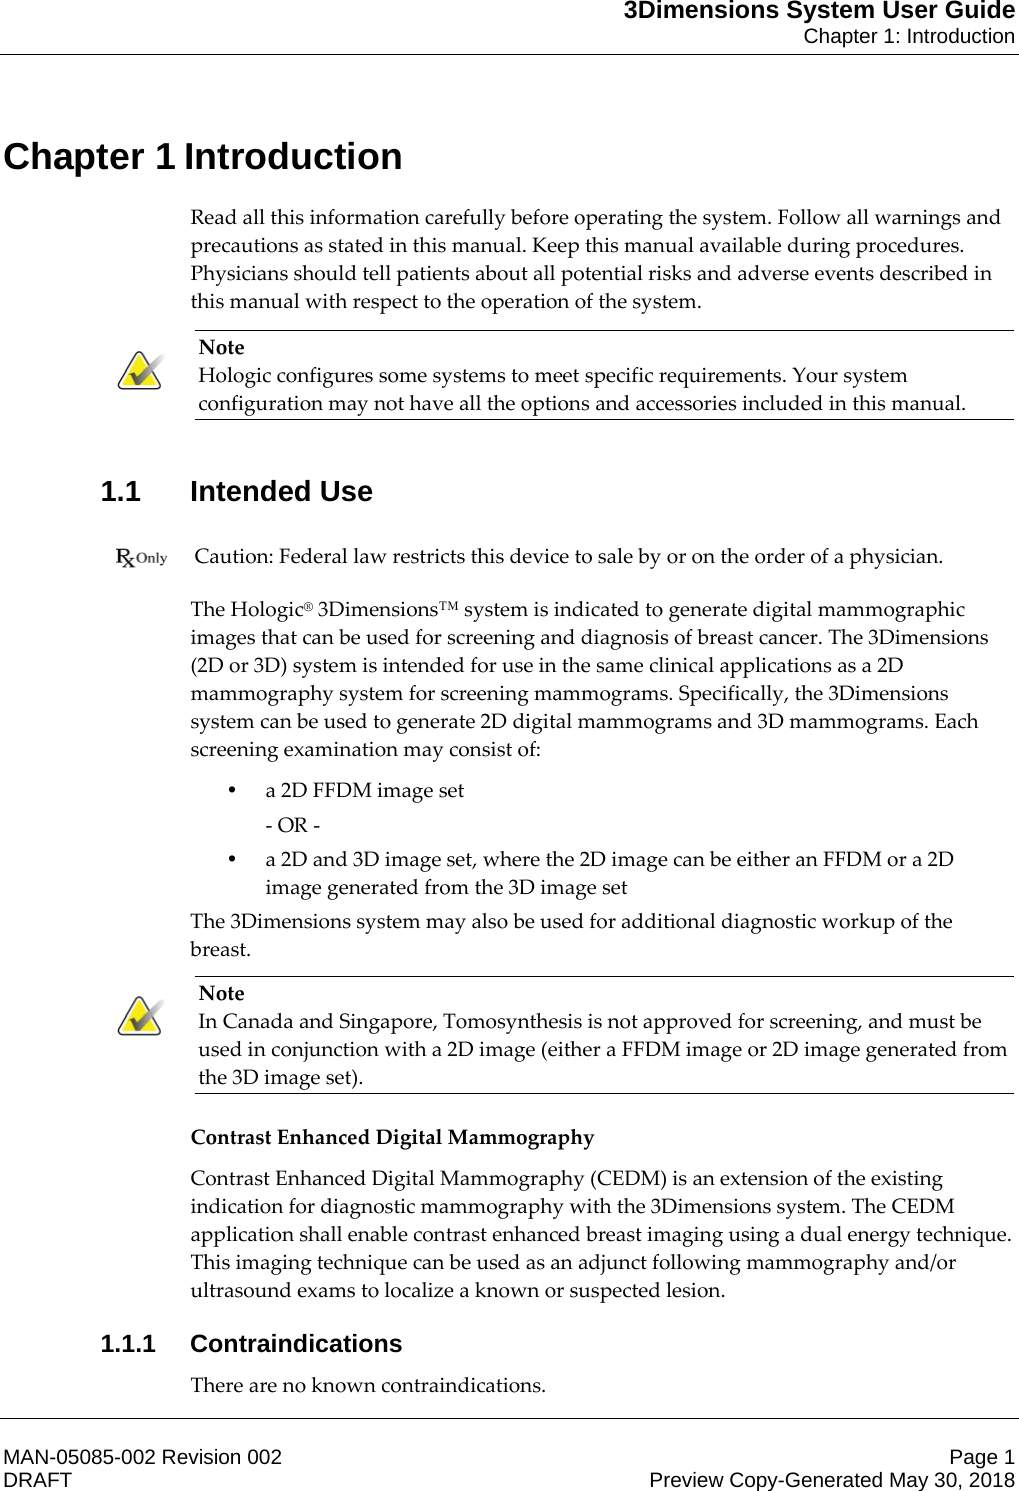 3Dimensions System User GuideChapter 1: IntroductionMAN-05085-002 Revision 002 Page 1DRAFT Preview Copy-Generated May 30, 20181: IntroductionRead all this information carefully before operating the system. Follow all warnings and precautions as stated in this manual. Keep this manual available during procedures. Physicians should tell patients about all potential risks and adverse events described in this manual with respect to the operation of the system. Note Hologic configures some systems to meet specific requirements. Your system configuration may not have all the options and accessories included in this manual.    1.1 Intended Use Caution: Federal law restricts this device to sale by or on the order of a physician.    The Hologic® 3Dimensions™ system is indicated to generate digital mammographic images that can be used for screening and diagnosis of breast cancer. The 3Dimensions (2D or 3D) system is intended for use in the same clinical applications as a 2D mammography system for screening mammograms. Specifically, the 3Dimensions system can be used to generate 2D digital mammograms and 3D mammograms. Each screening examination may consist of: •a 2D FFDM image set - OR - •a 2D and 3D image set, where the 2D image can be either an FFDM or a 2D image generated from the 3D image set The 3Dimensions system may also be used for additional diagnostic workup of the breast. Note In Canada and Singapore, Tomosynthesis is not approved for screening, and must be used in conjunction with a 2D image (either a FFDM image or 2D image generated from the 3D image set).    Contrast Enhanced Digital Mammography Contrast Enhanced Digital Mammography (CEDM) is an extension of the existing indication for diagnostic mammography with the 3Dimensions system. The CEDM application shall enable contrast enhanced breast imaging using a dual energy technique. This imaging technique can be used as an adjunct following mammography and/or ultrasound exams to localize a known or suspected lesion. 1.1.1 ContraindicationsThere are no known contraindications. Chapter 1